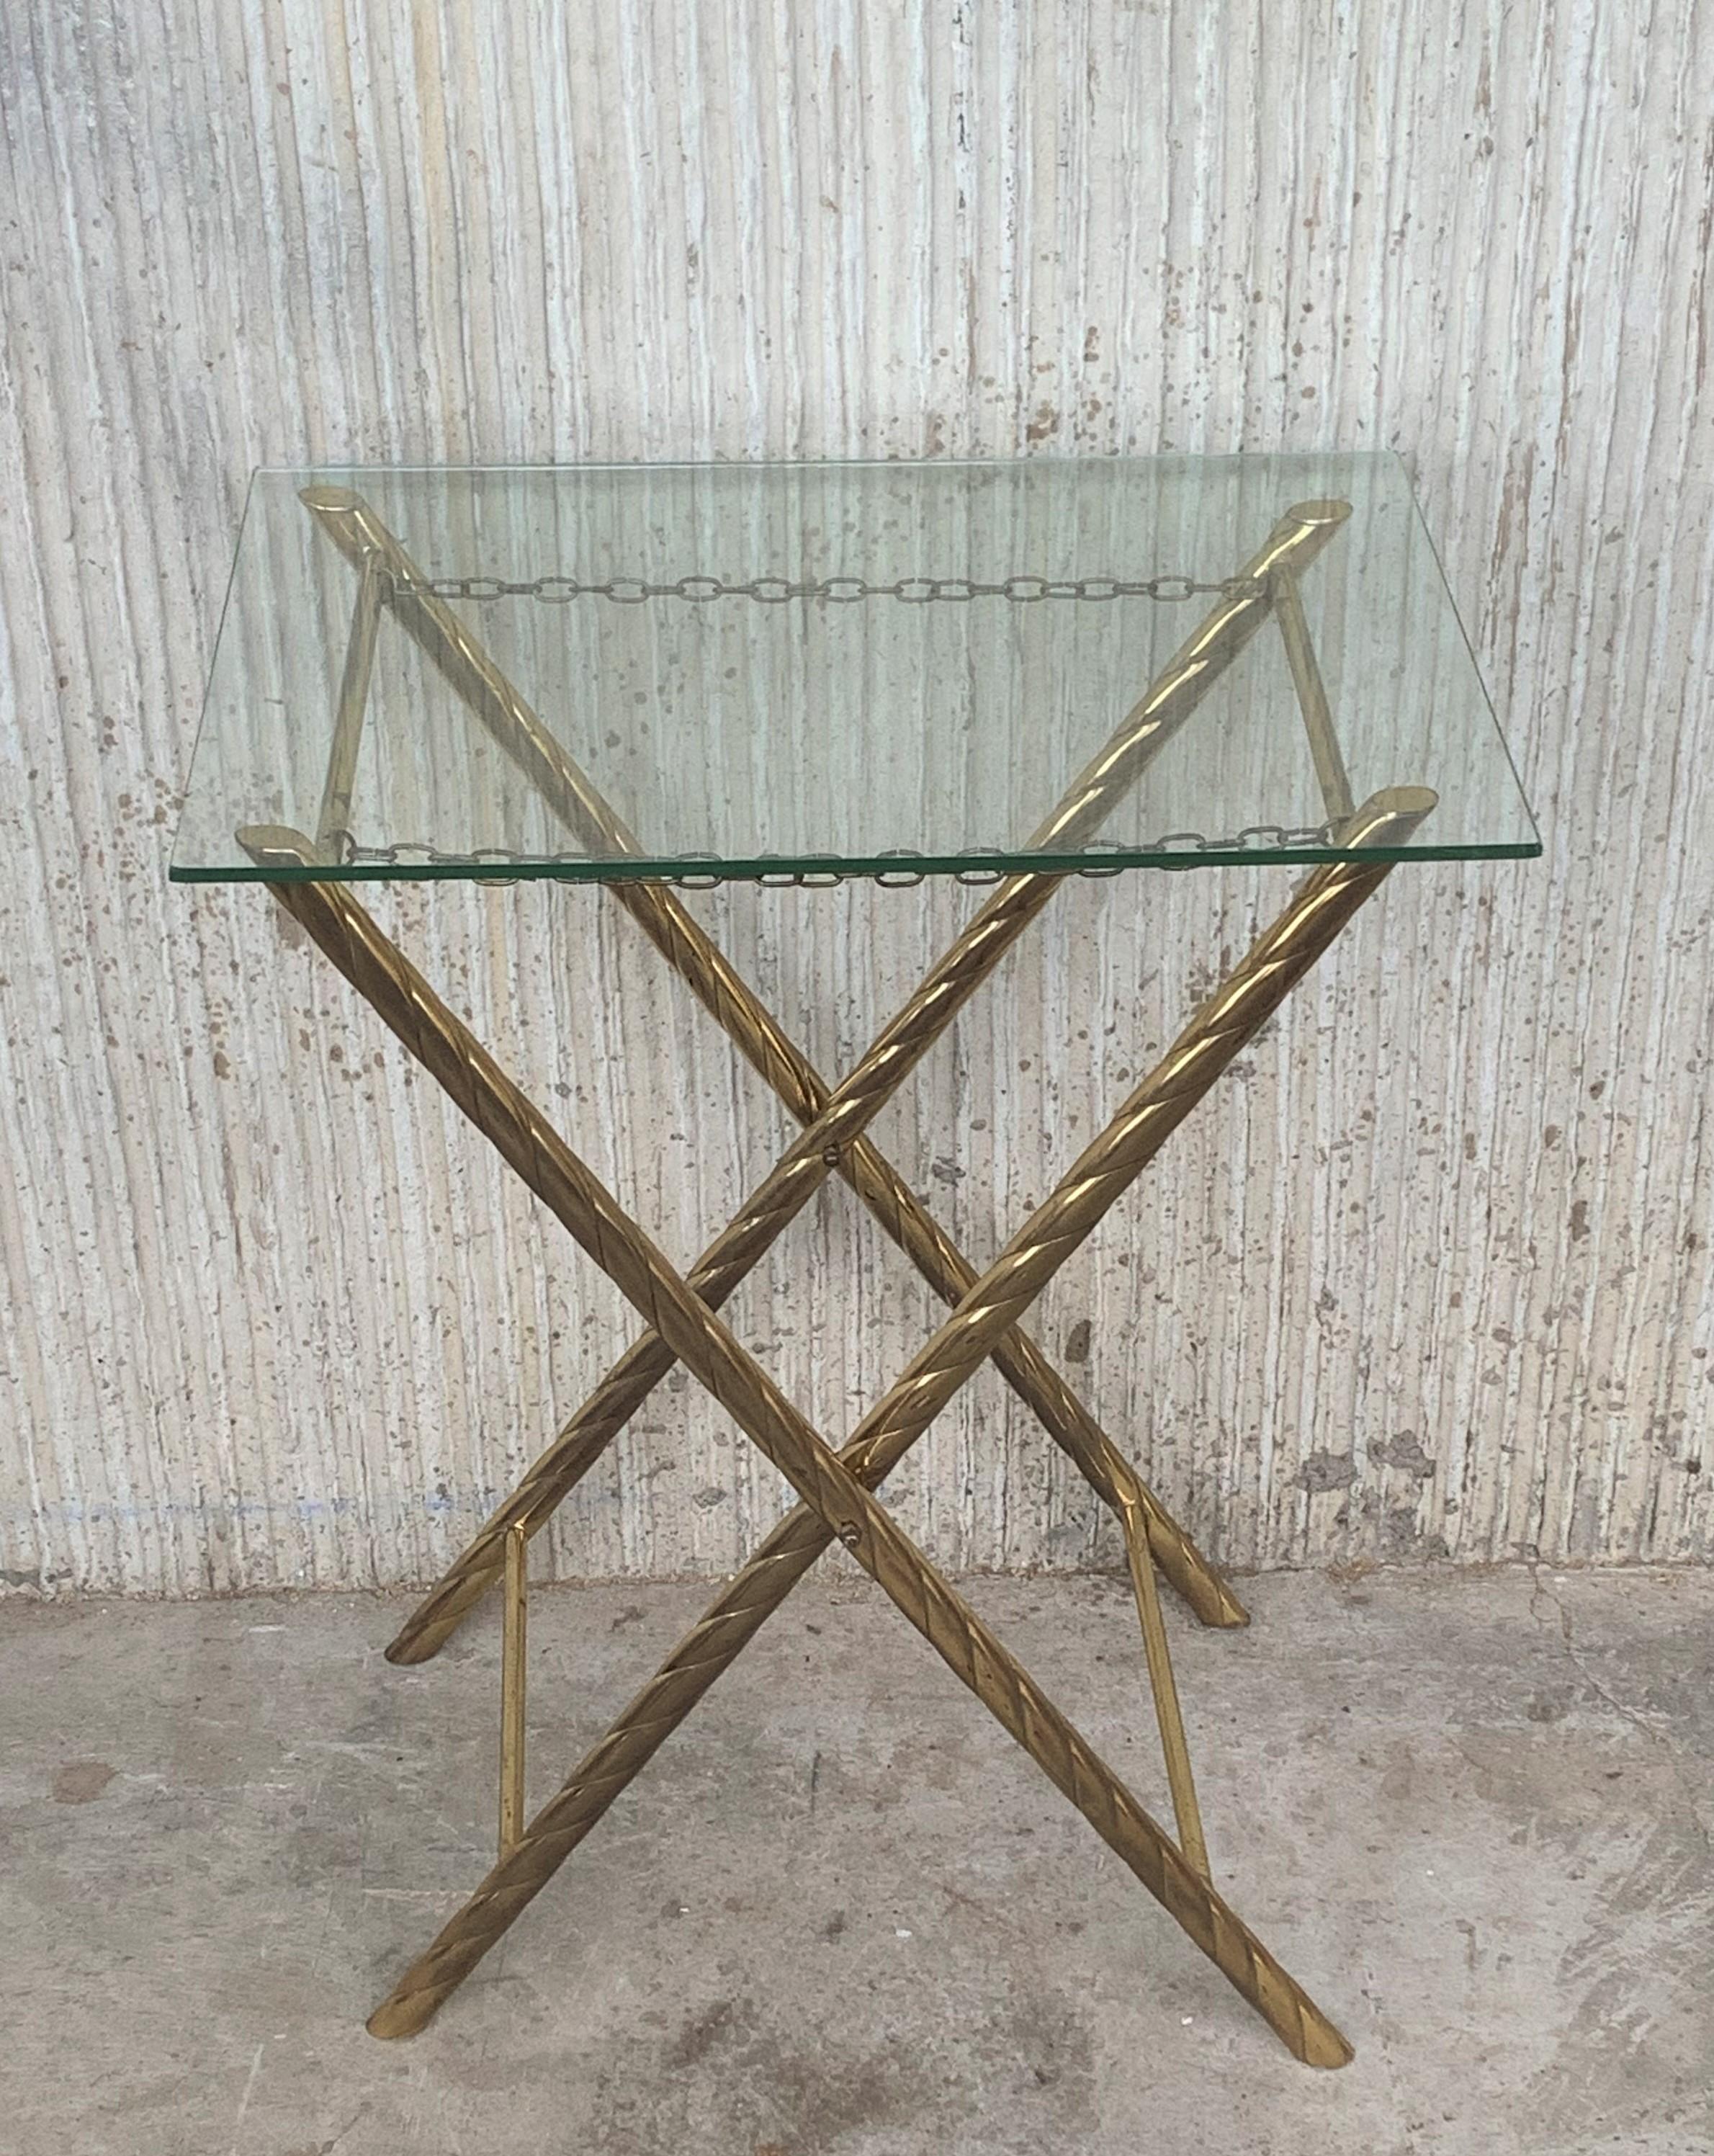 Folding coffee table and stand in faux brass bamboo manufactured in the 1960s.
This fantastic table is like we have never seen before.